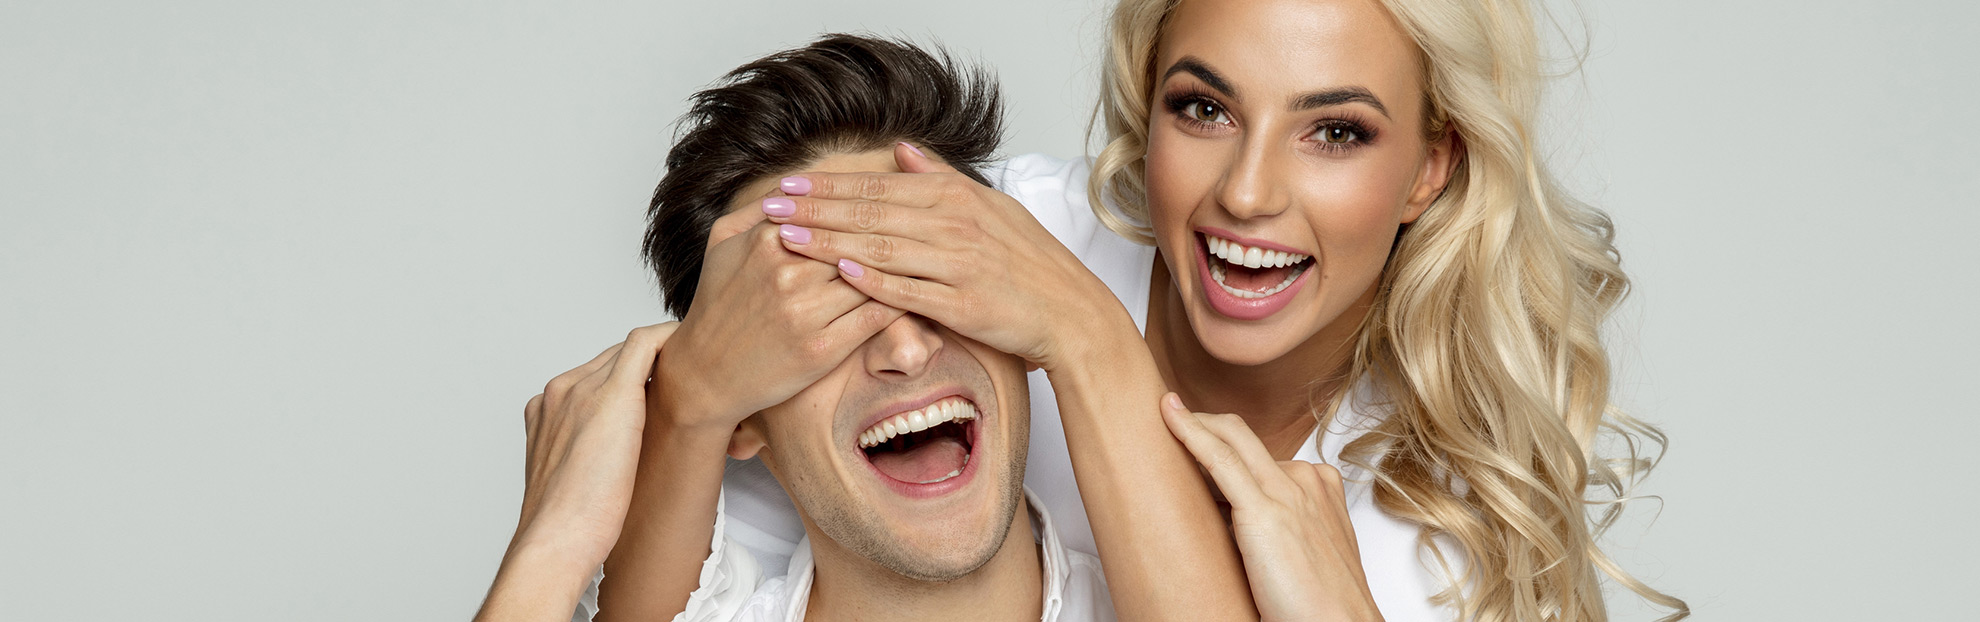 LASIK eye surgery patients covering eyes and laughing